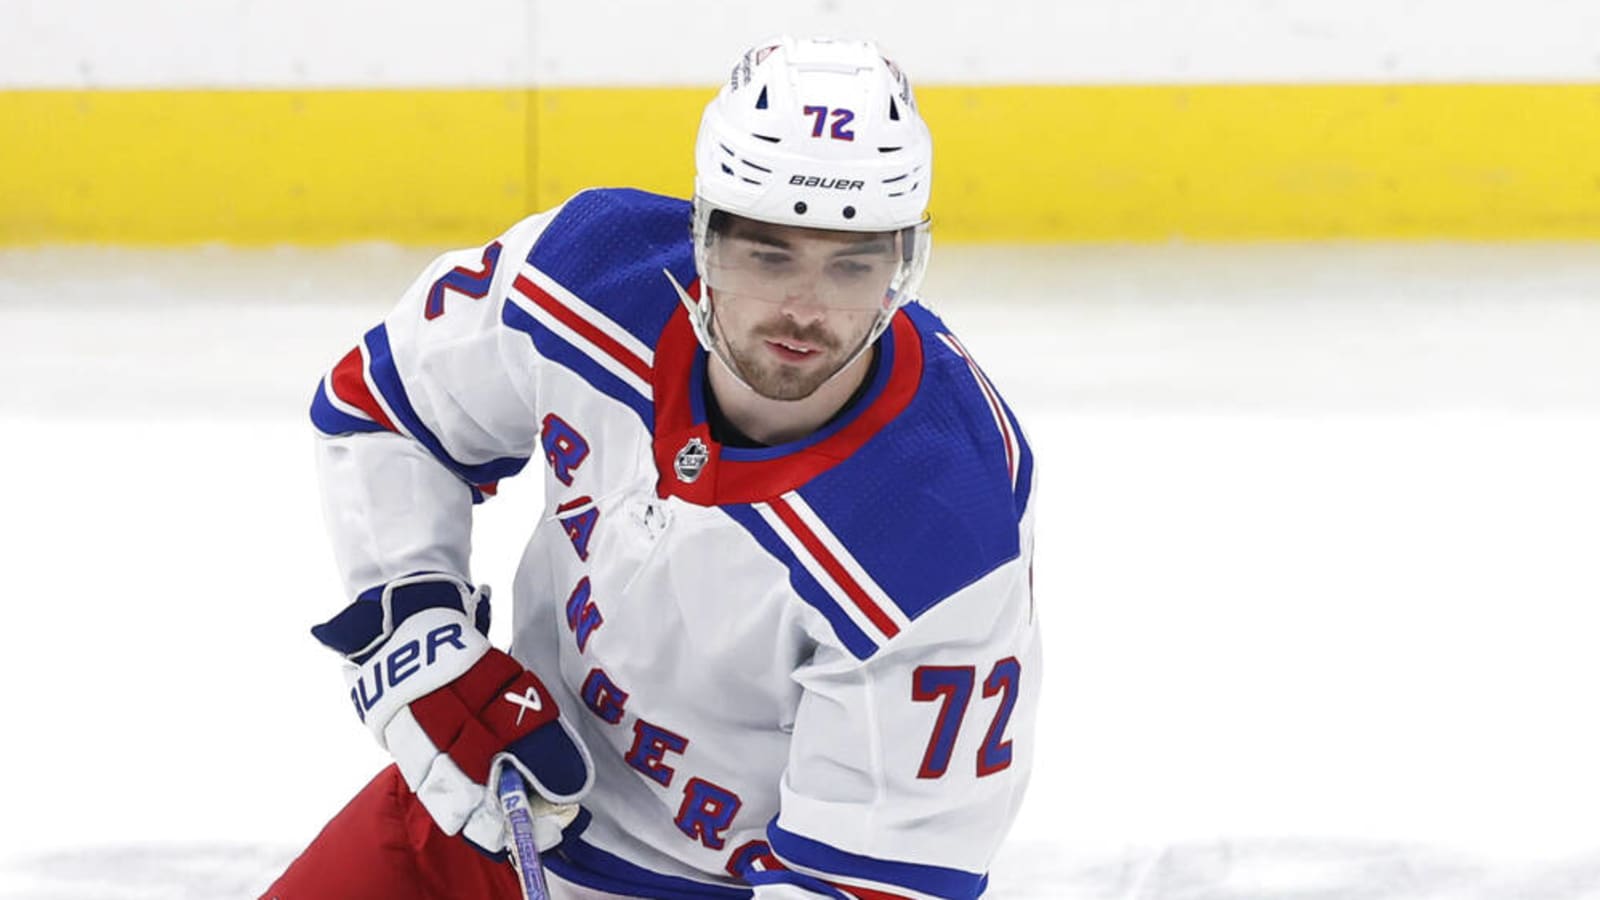 Rangers: What will Filip Chytil’s return to the lineup mean for Matt Rempe going forward?